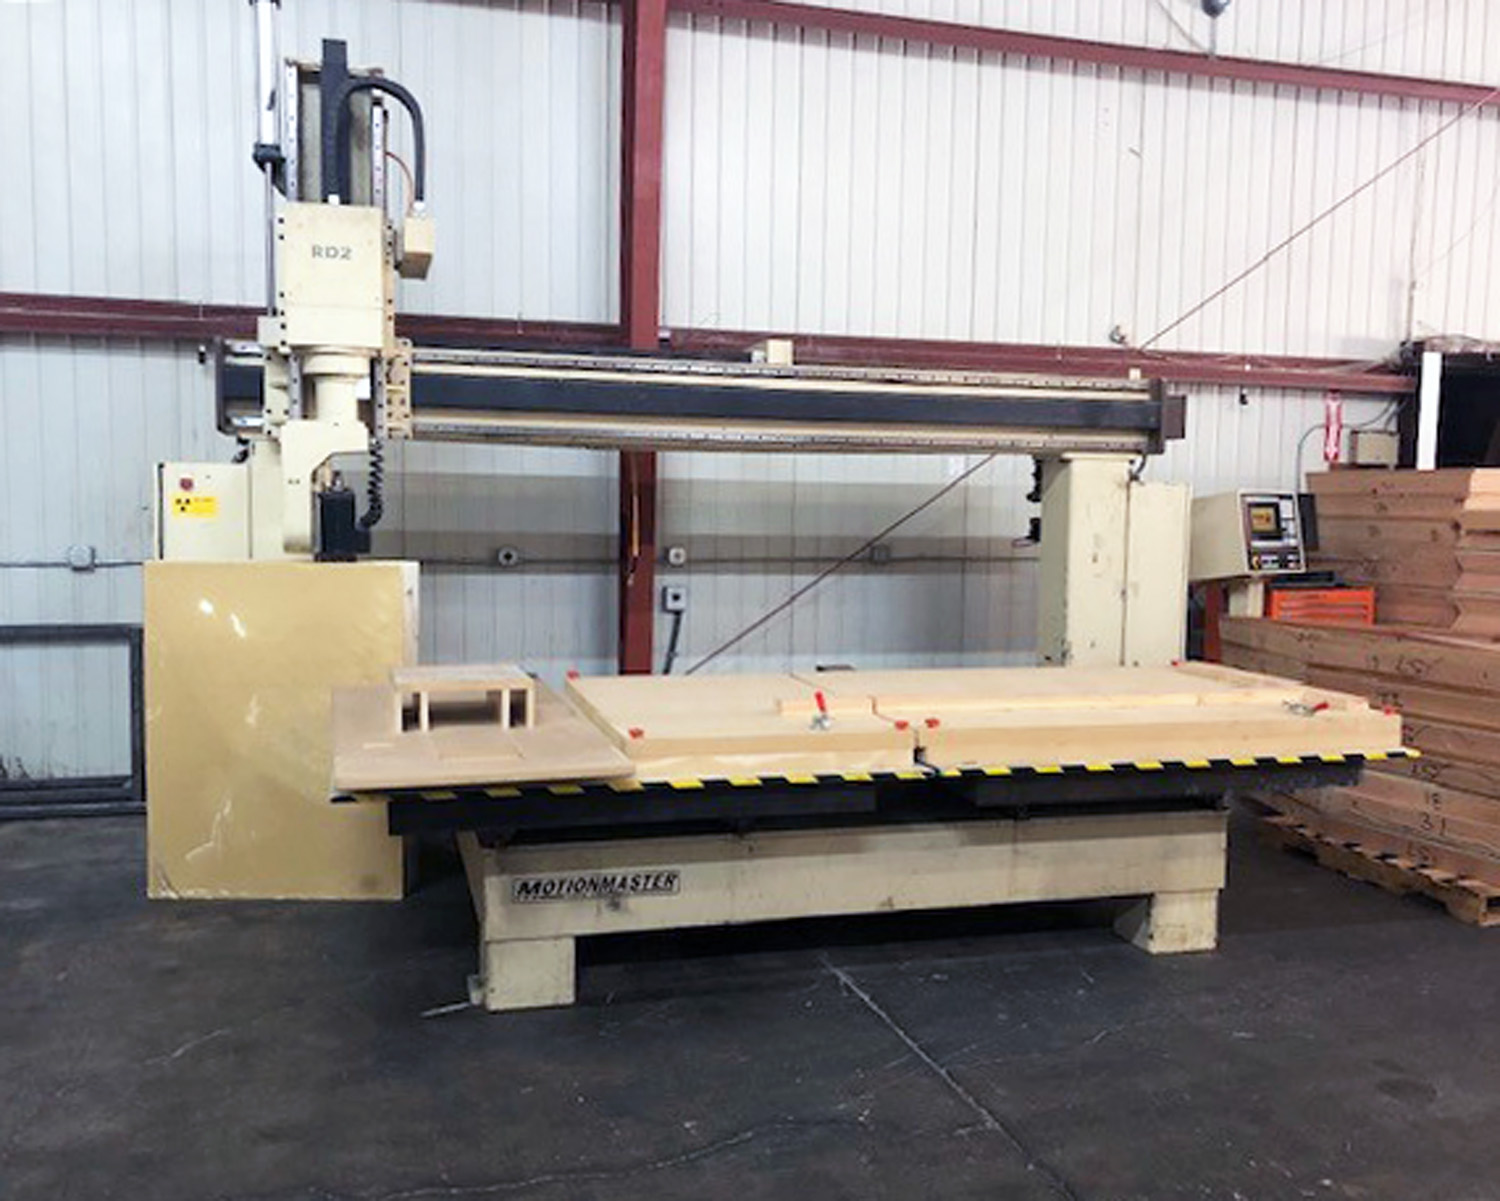 Motionmaster 5 axis CNC Router E758